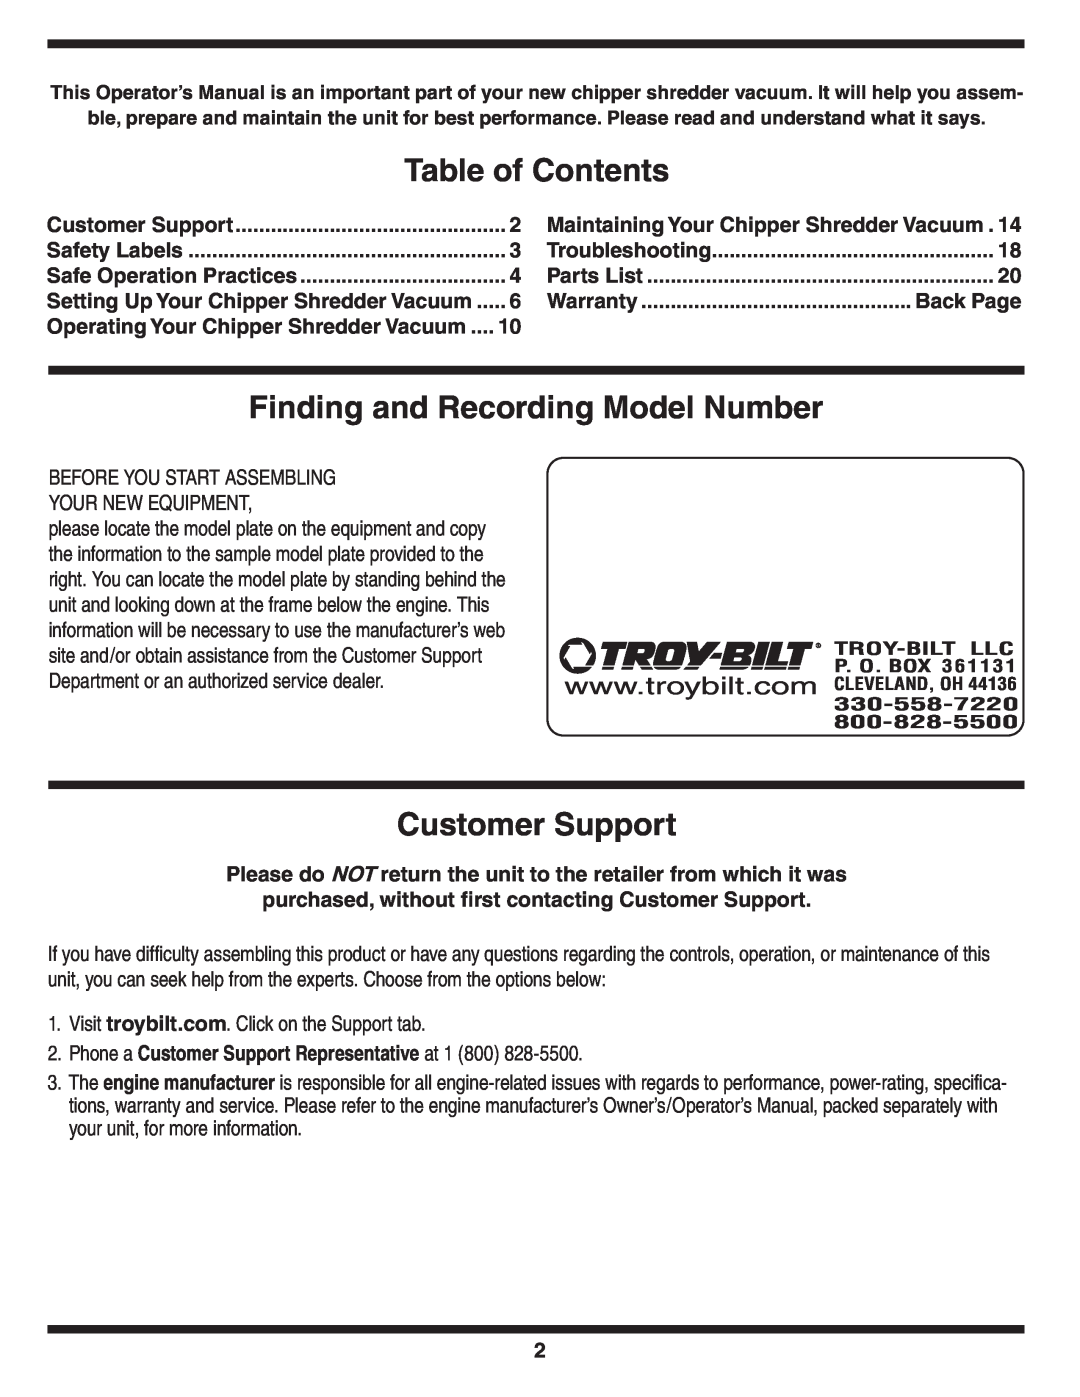 Troy-Bilt 70 warranty Table of Contents, Finding and Recording Model Number, Customer Support, Safety Labels, Back Page 